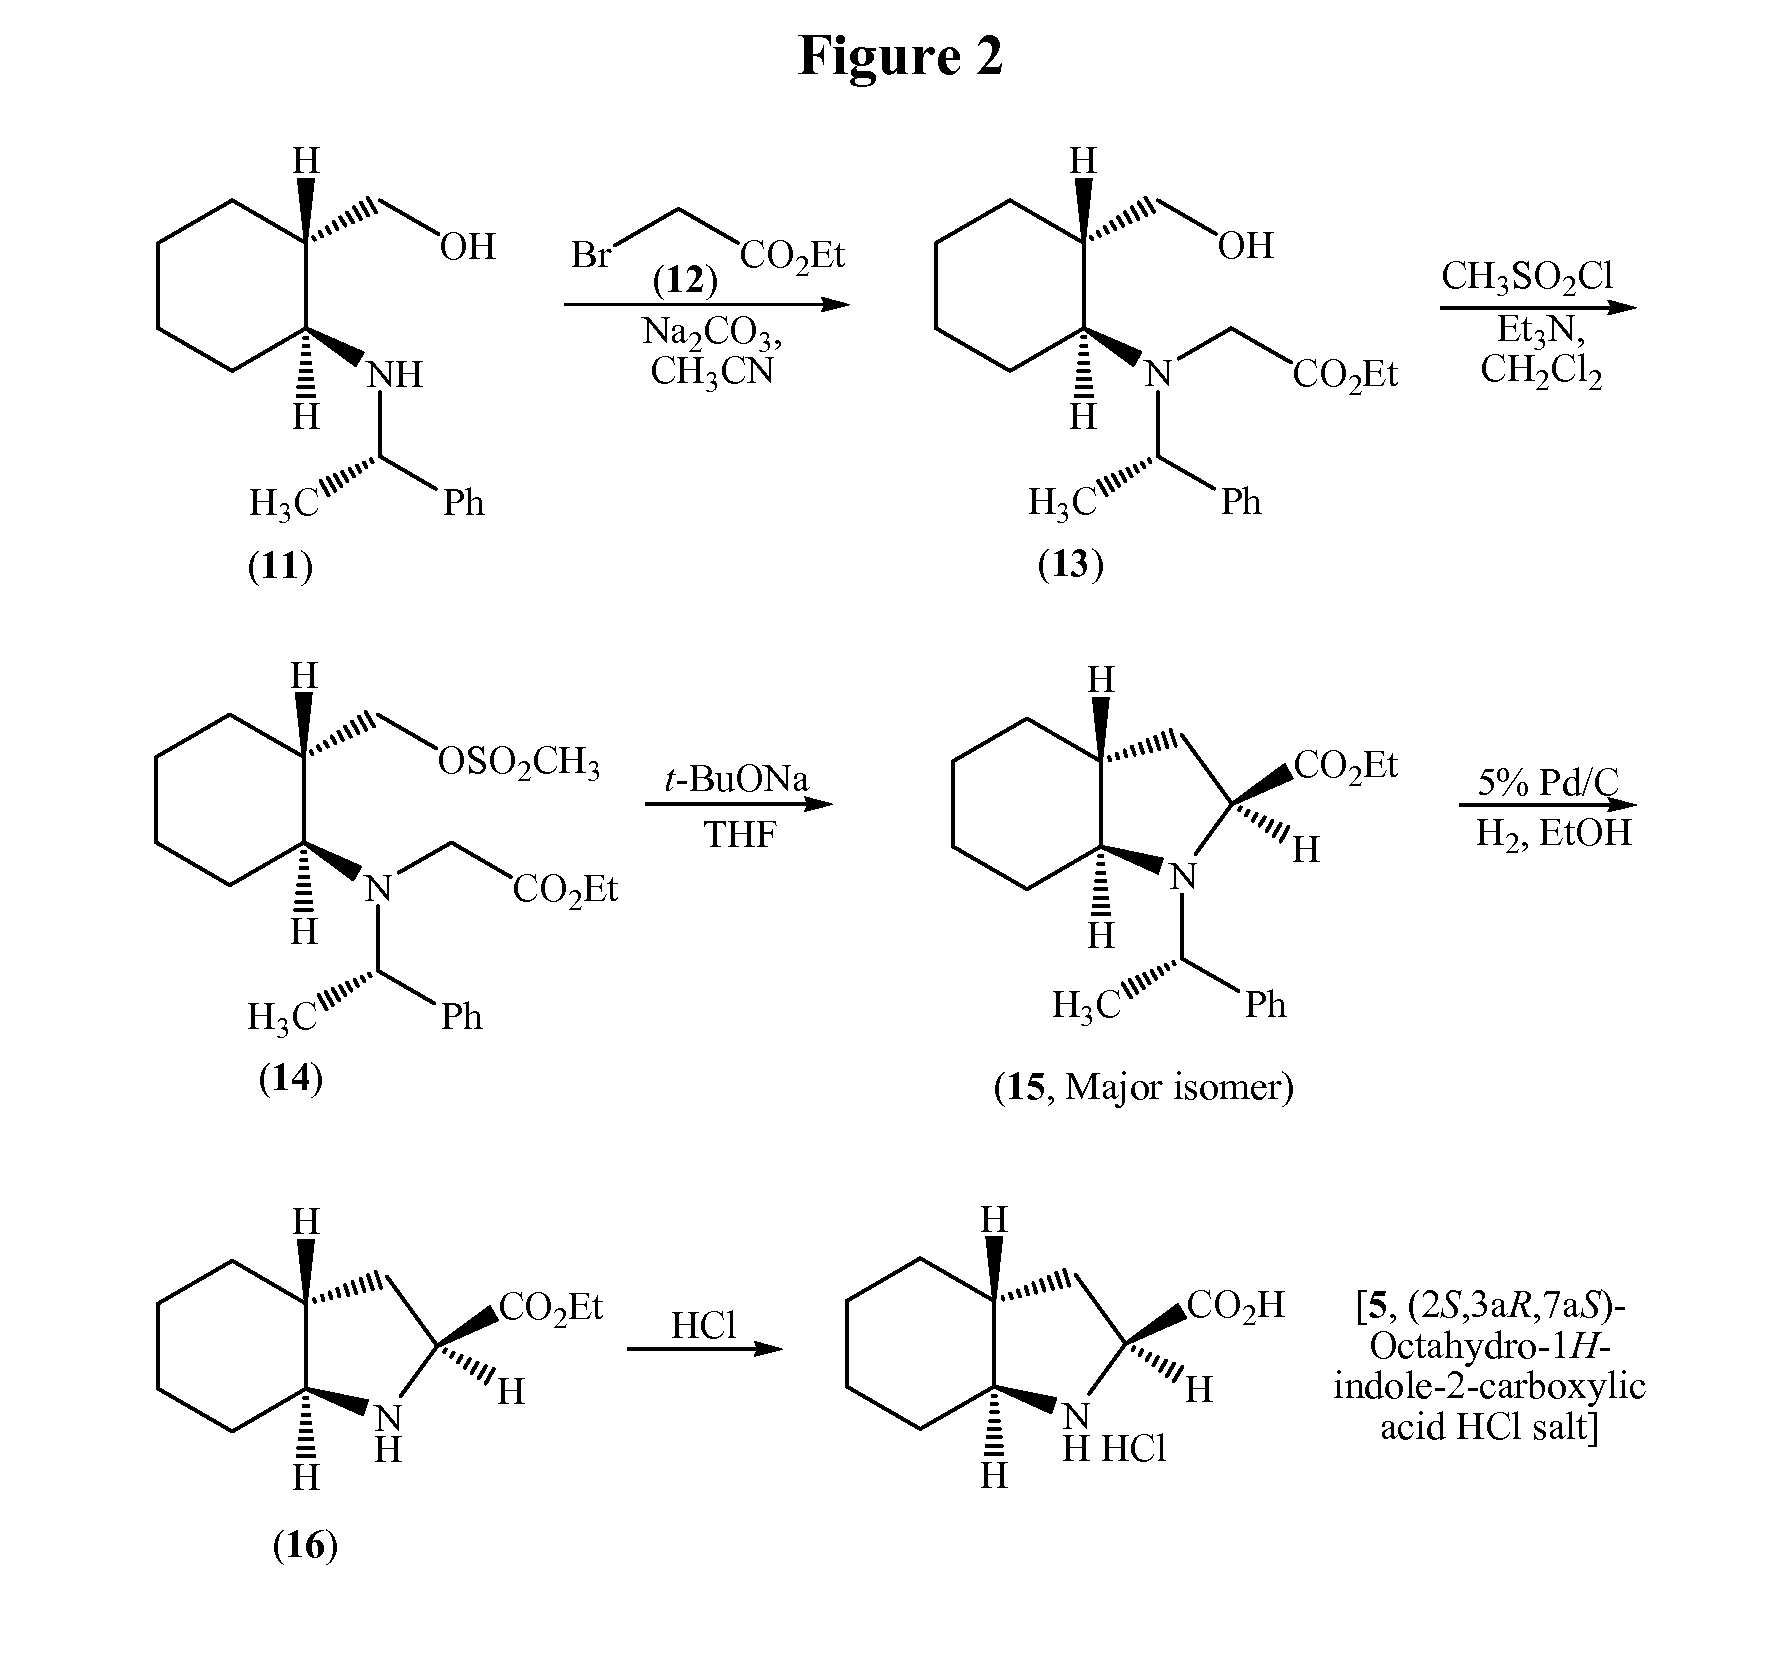 Process for the synthesis of (2s,3ar,7as)-octahydro-1h-indole carboxylic acid as an intermediate for trandolapril